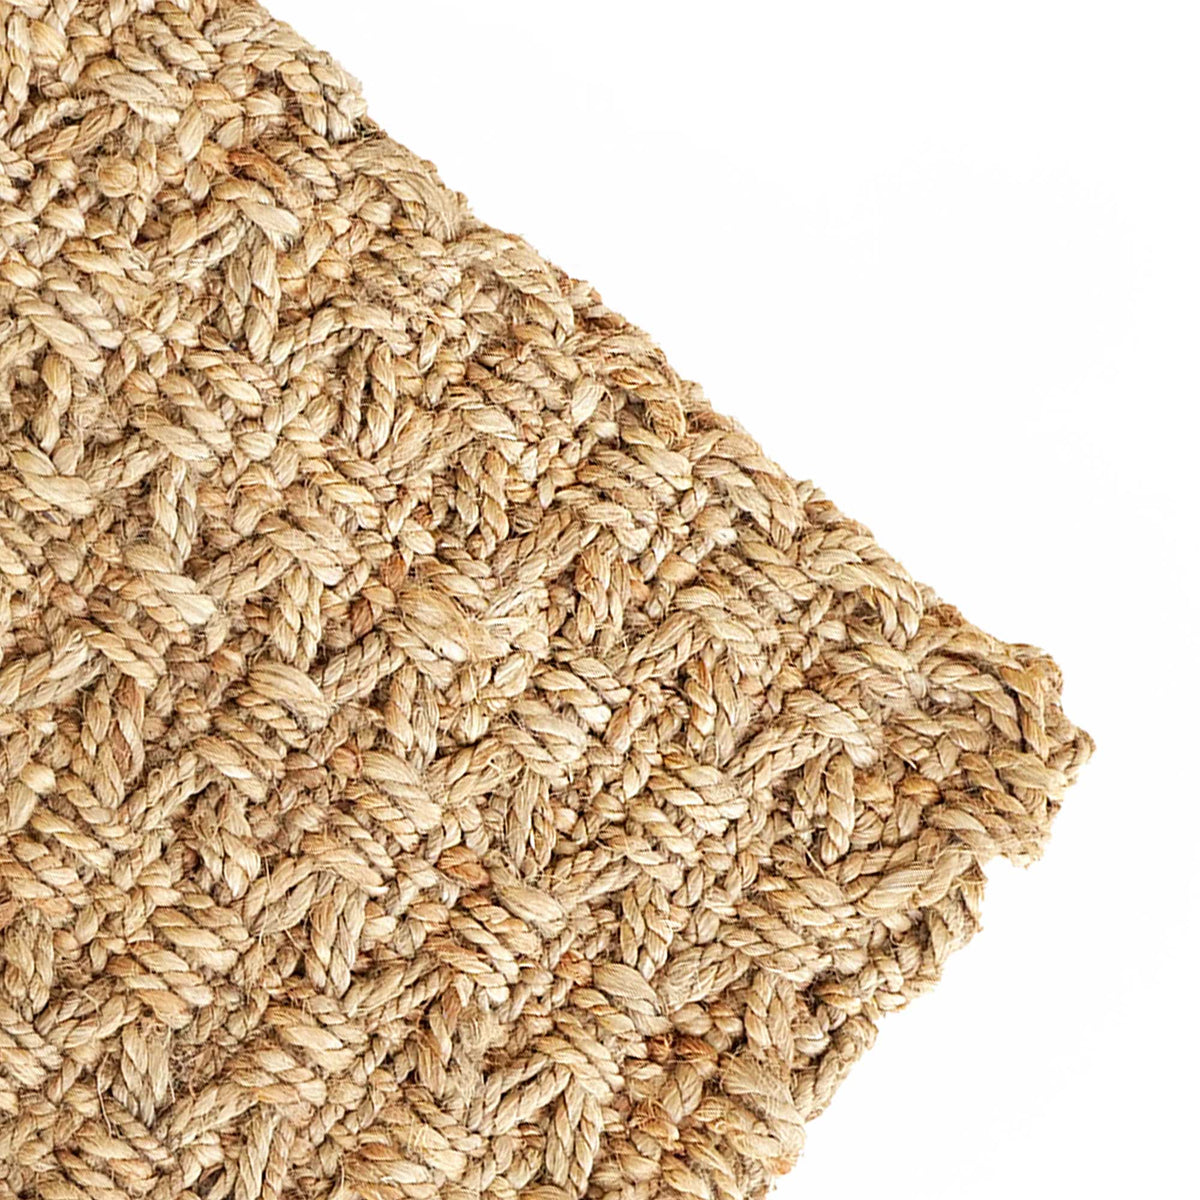 Knotted Luxe Mat - Braided and Knotted Mat - Hand Woven and Organic Braided Jute Mat